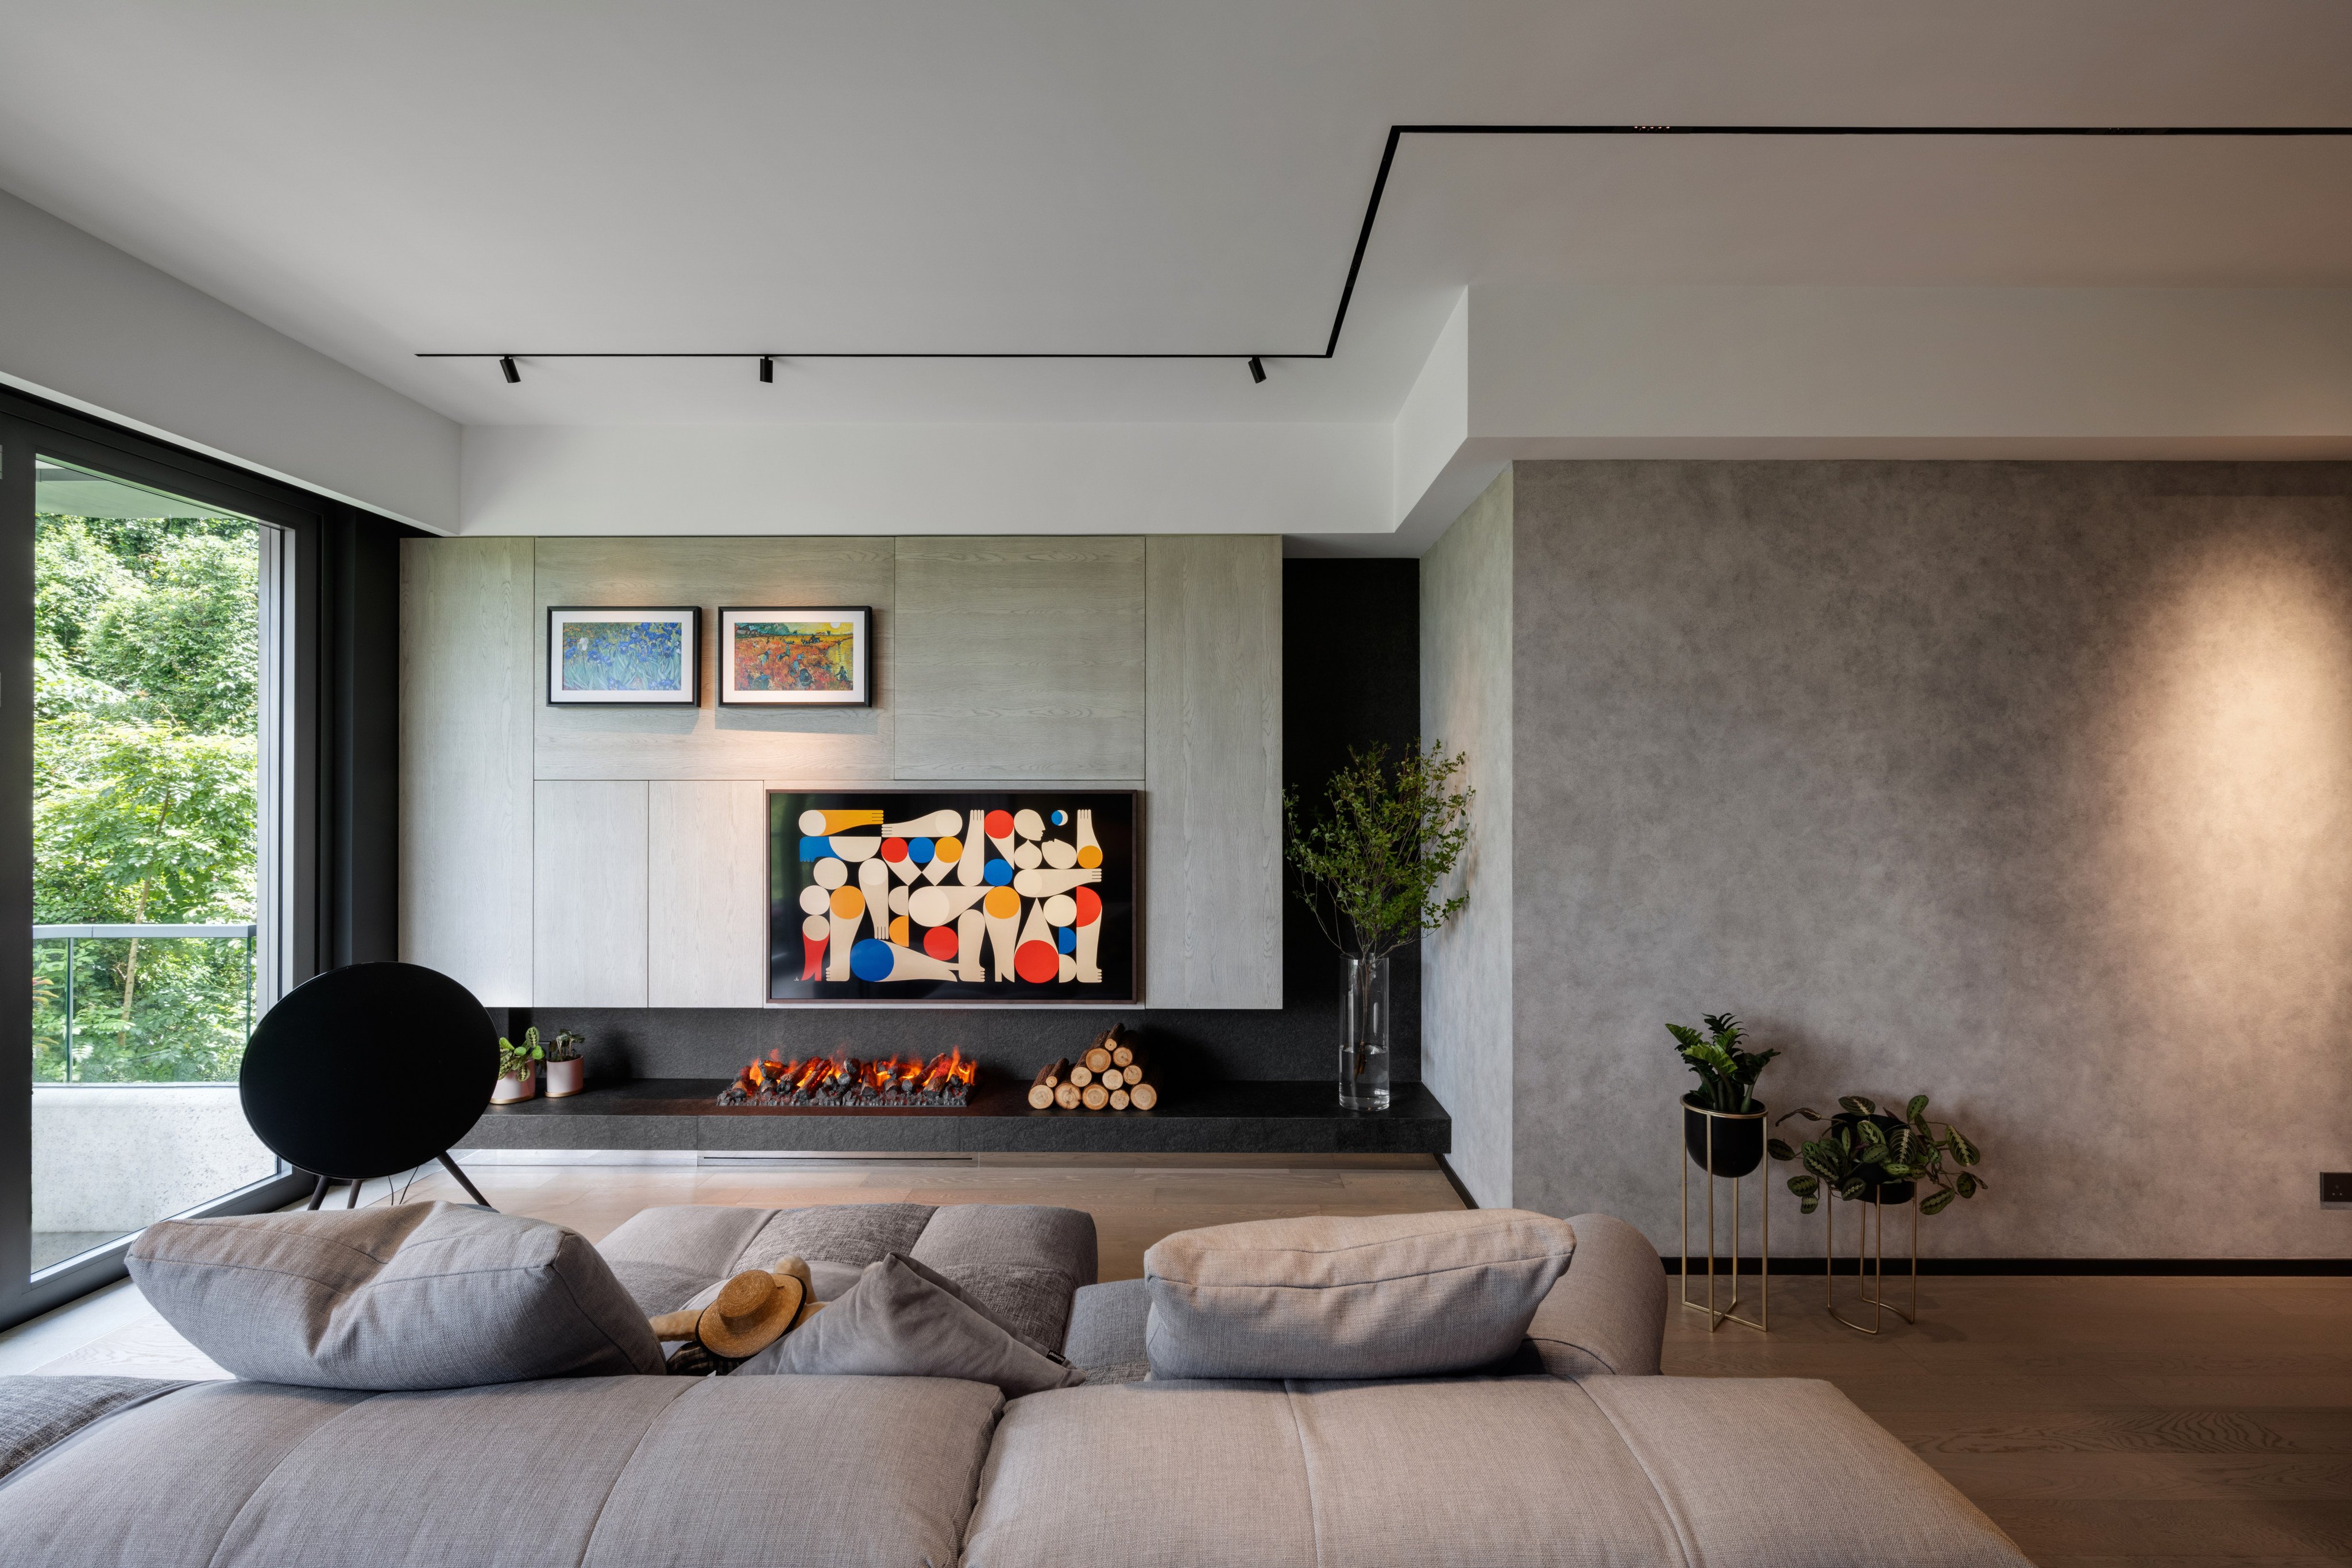 Bringing a taste of Japan to Hong Kong’s New Territories, a tech investor’s 1,700 sq ft flat is an oasis of calm. Photo: Steven Ko